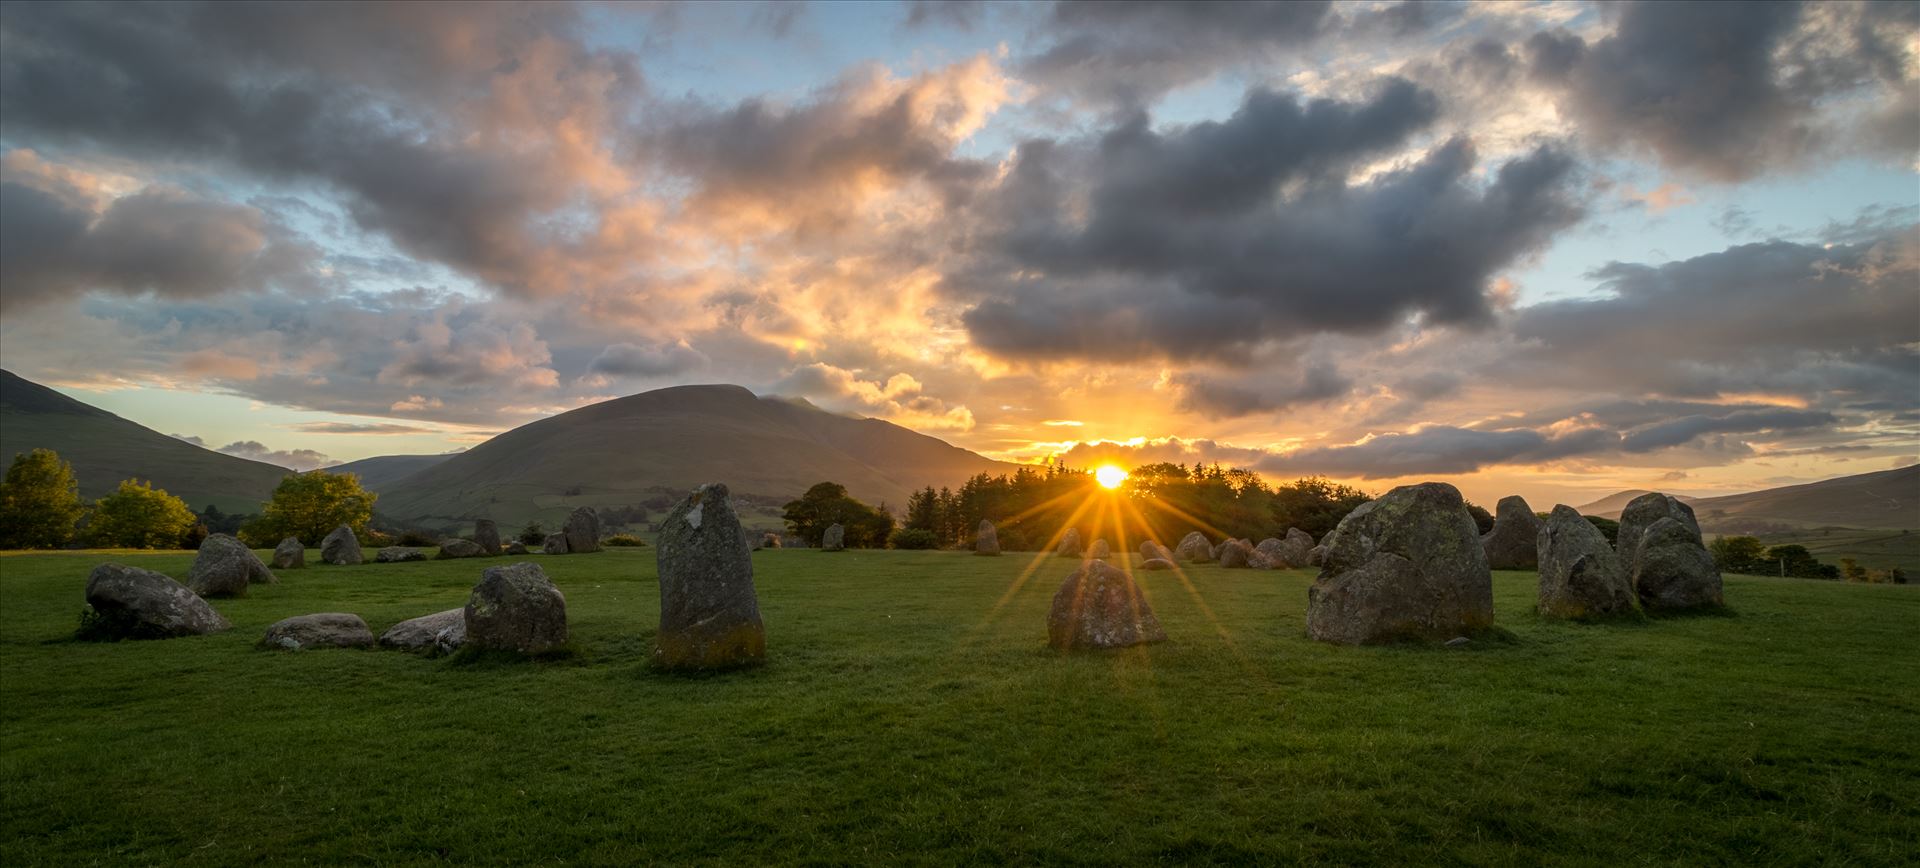 Castlerigg Stone Circle Castlerigg Stone Circle is situated just outside Keswick in the Lake District in the North of England by Tony Keogh Photography